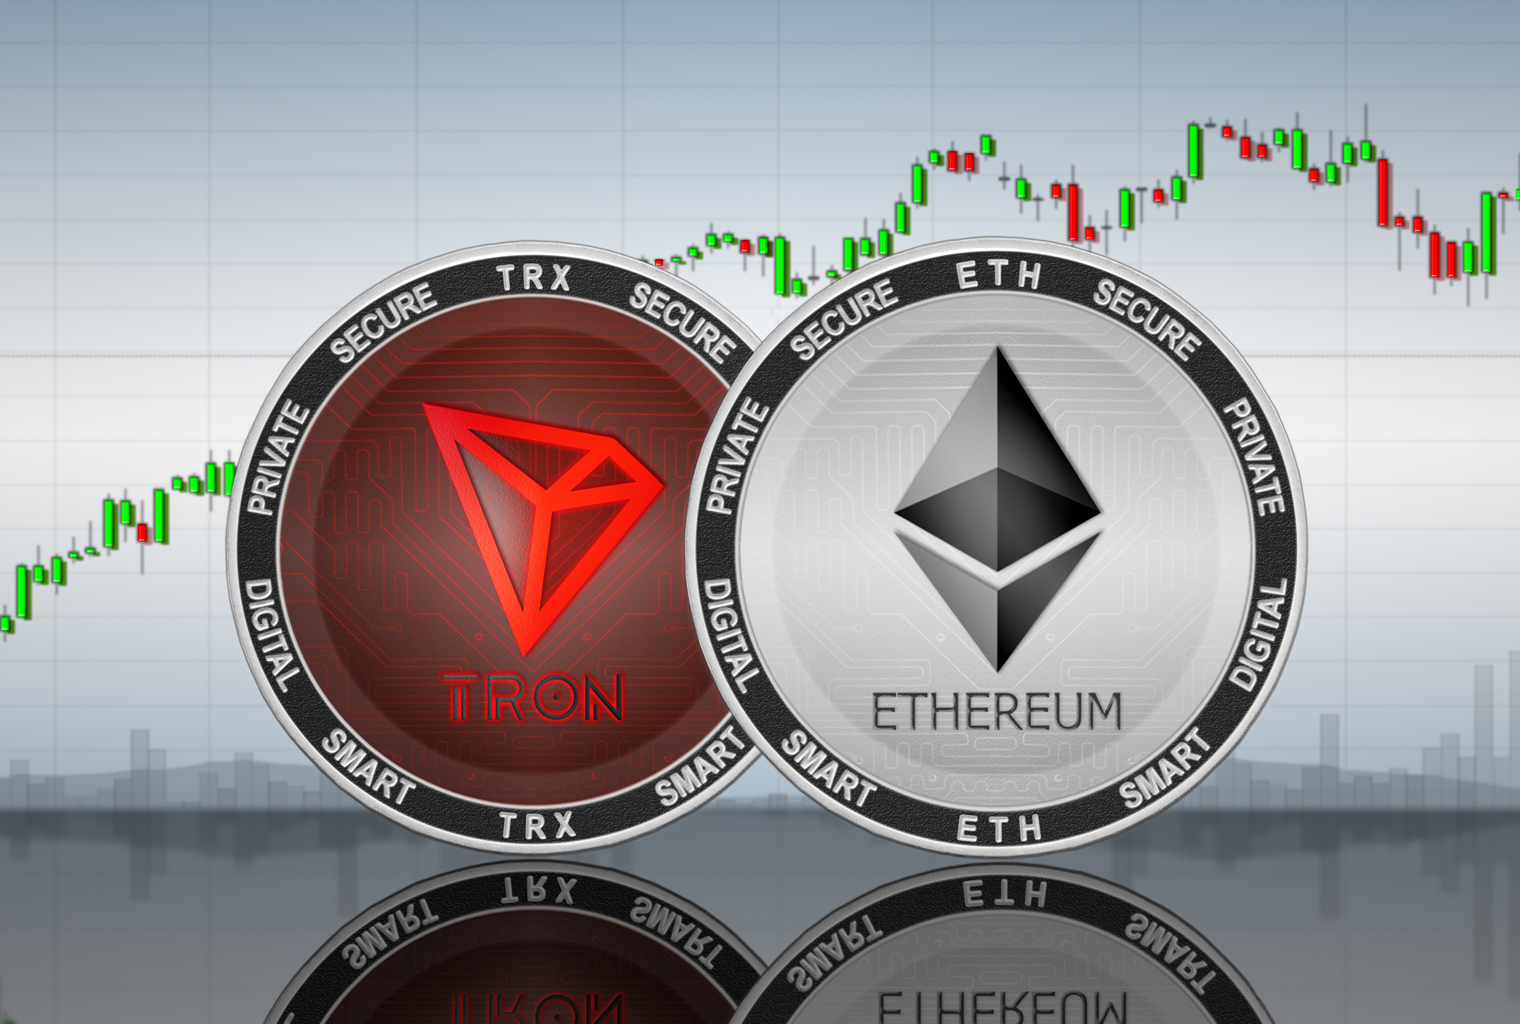 Ethereum vs Tron: Comparison of data from both networks after the viral tweet